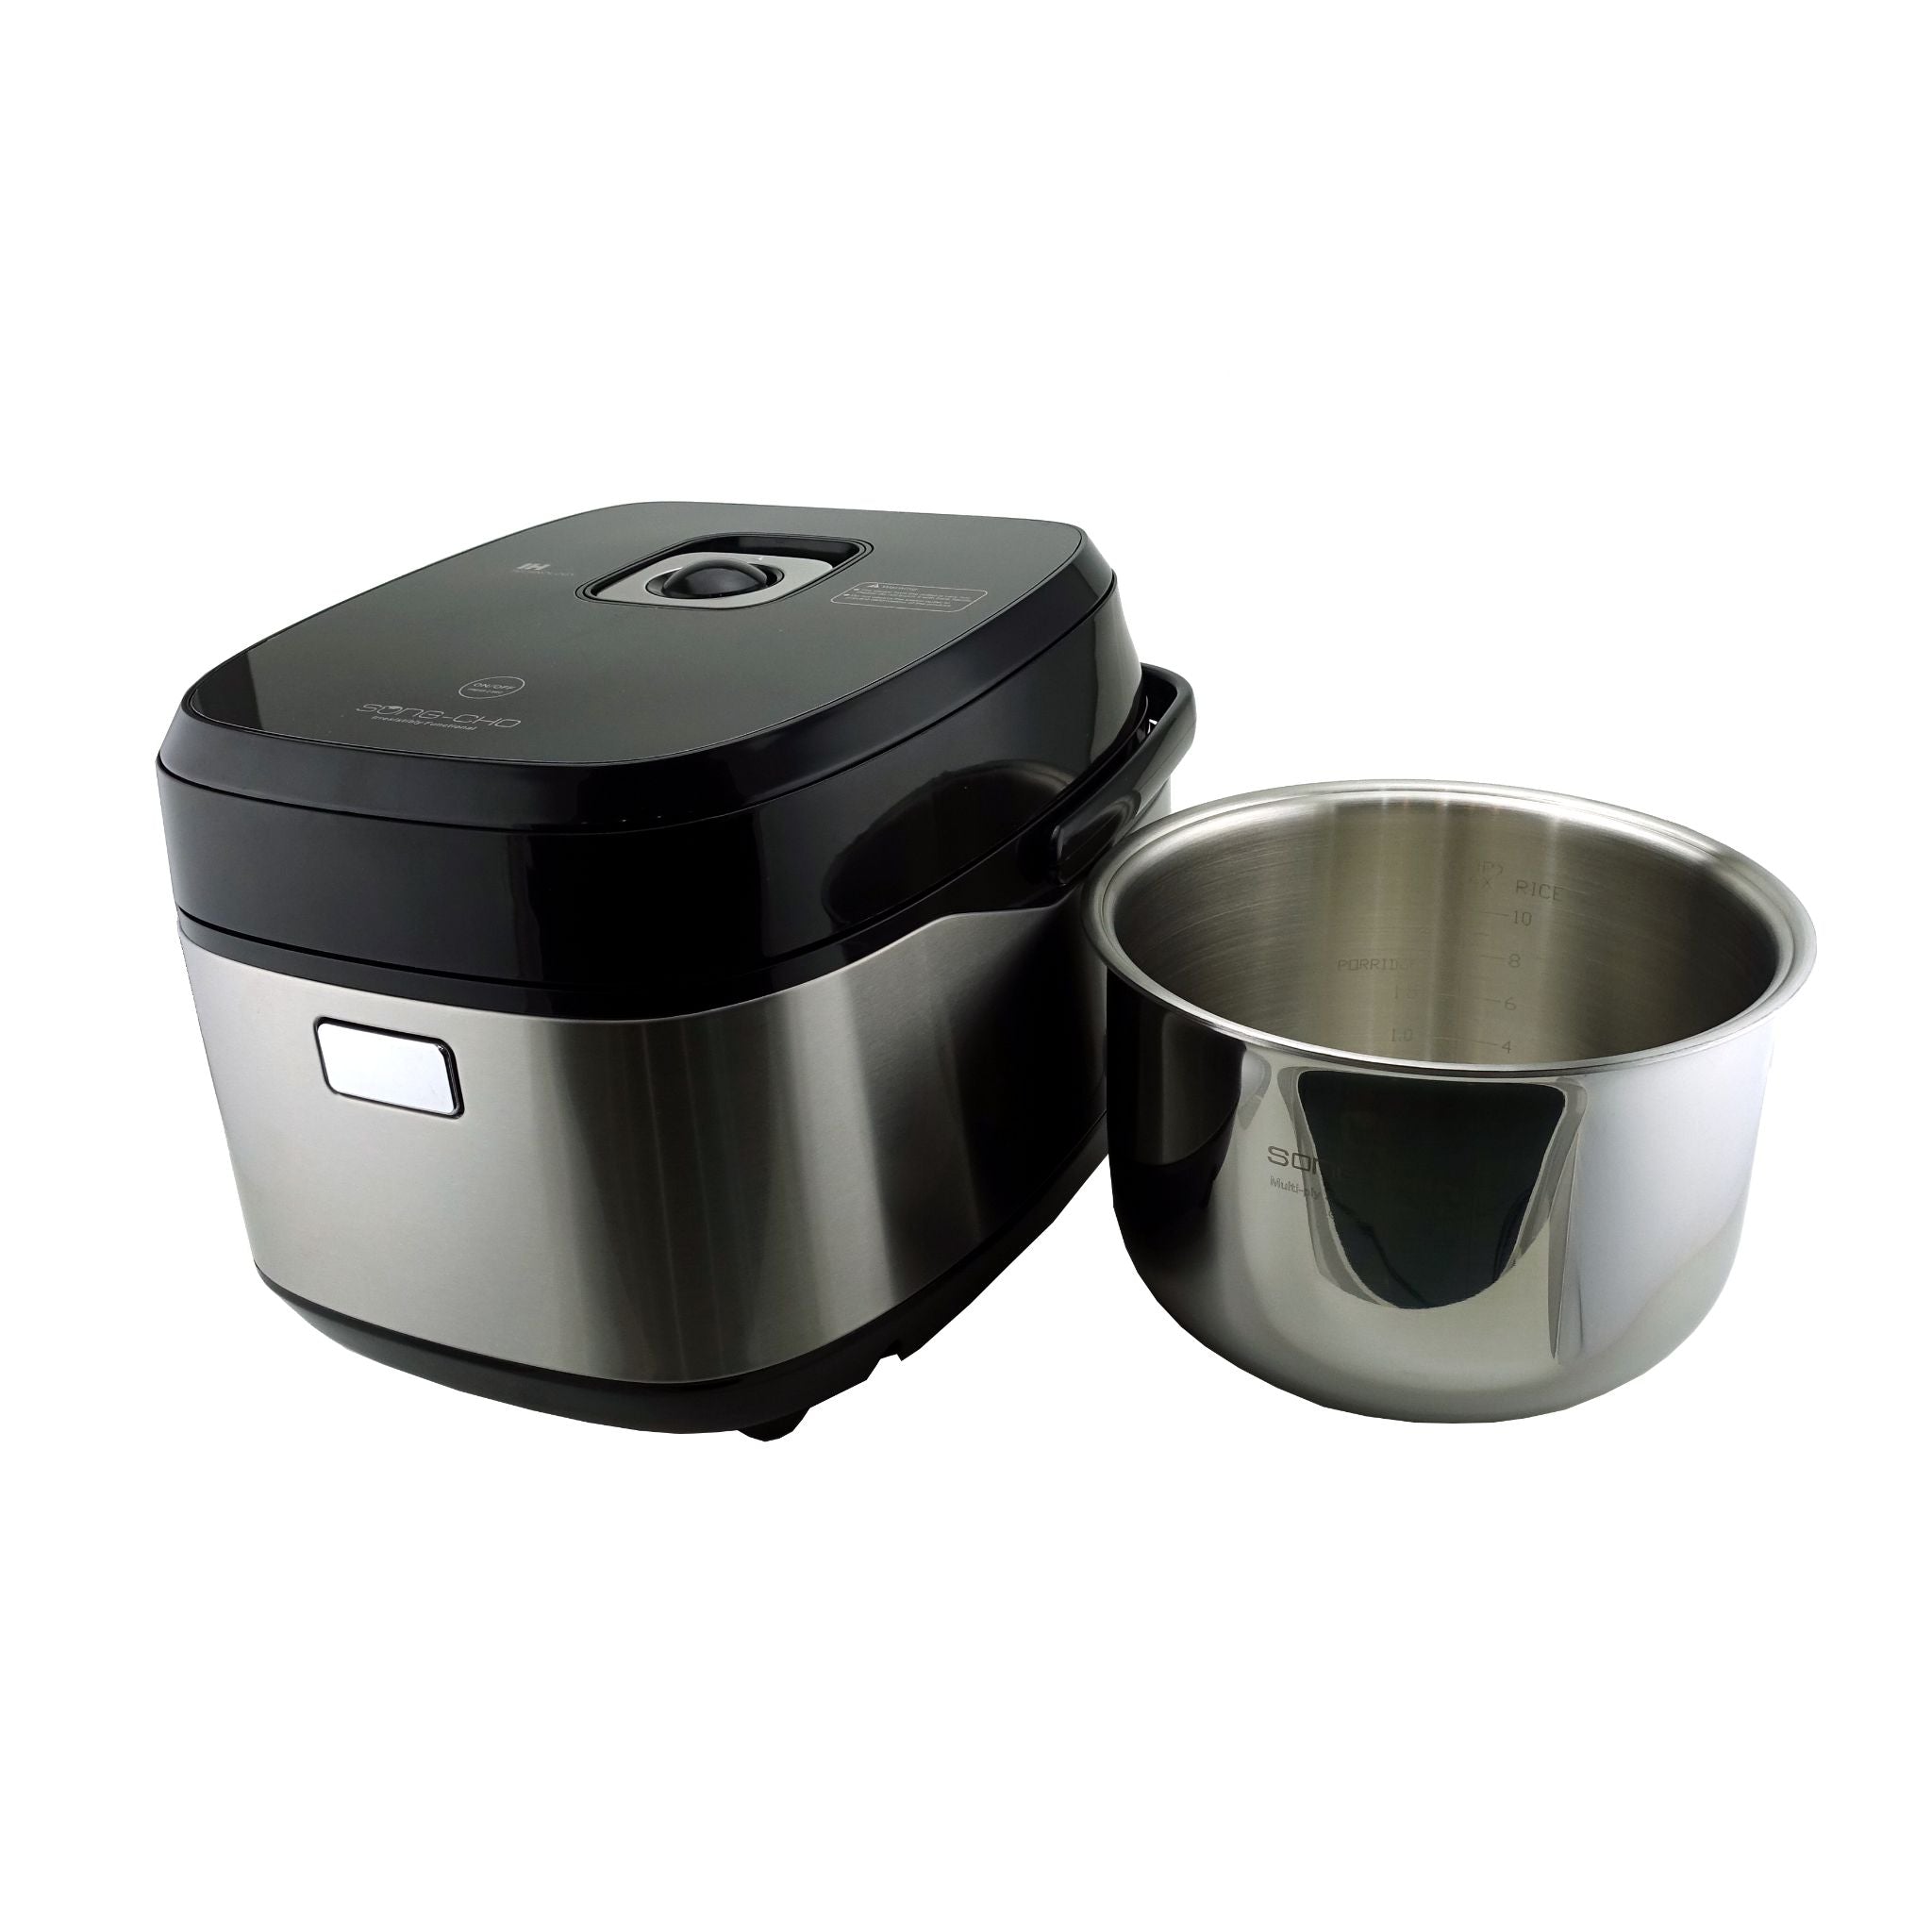 Song-Cho 1.8L IH Sous Vide Rice Cooker (SC-IH18S)